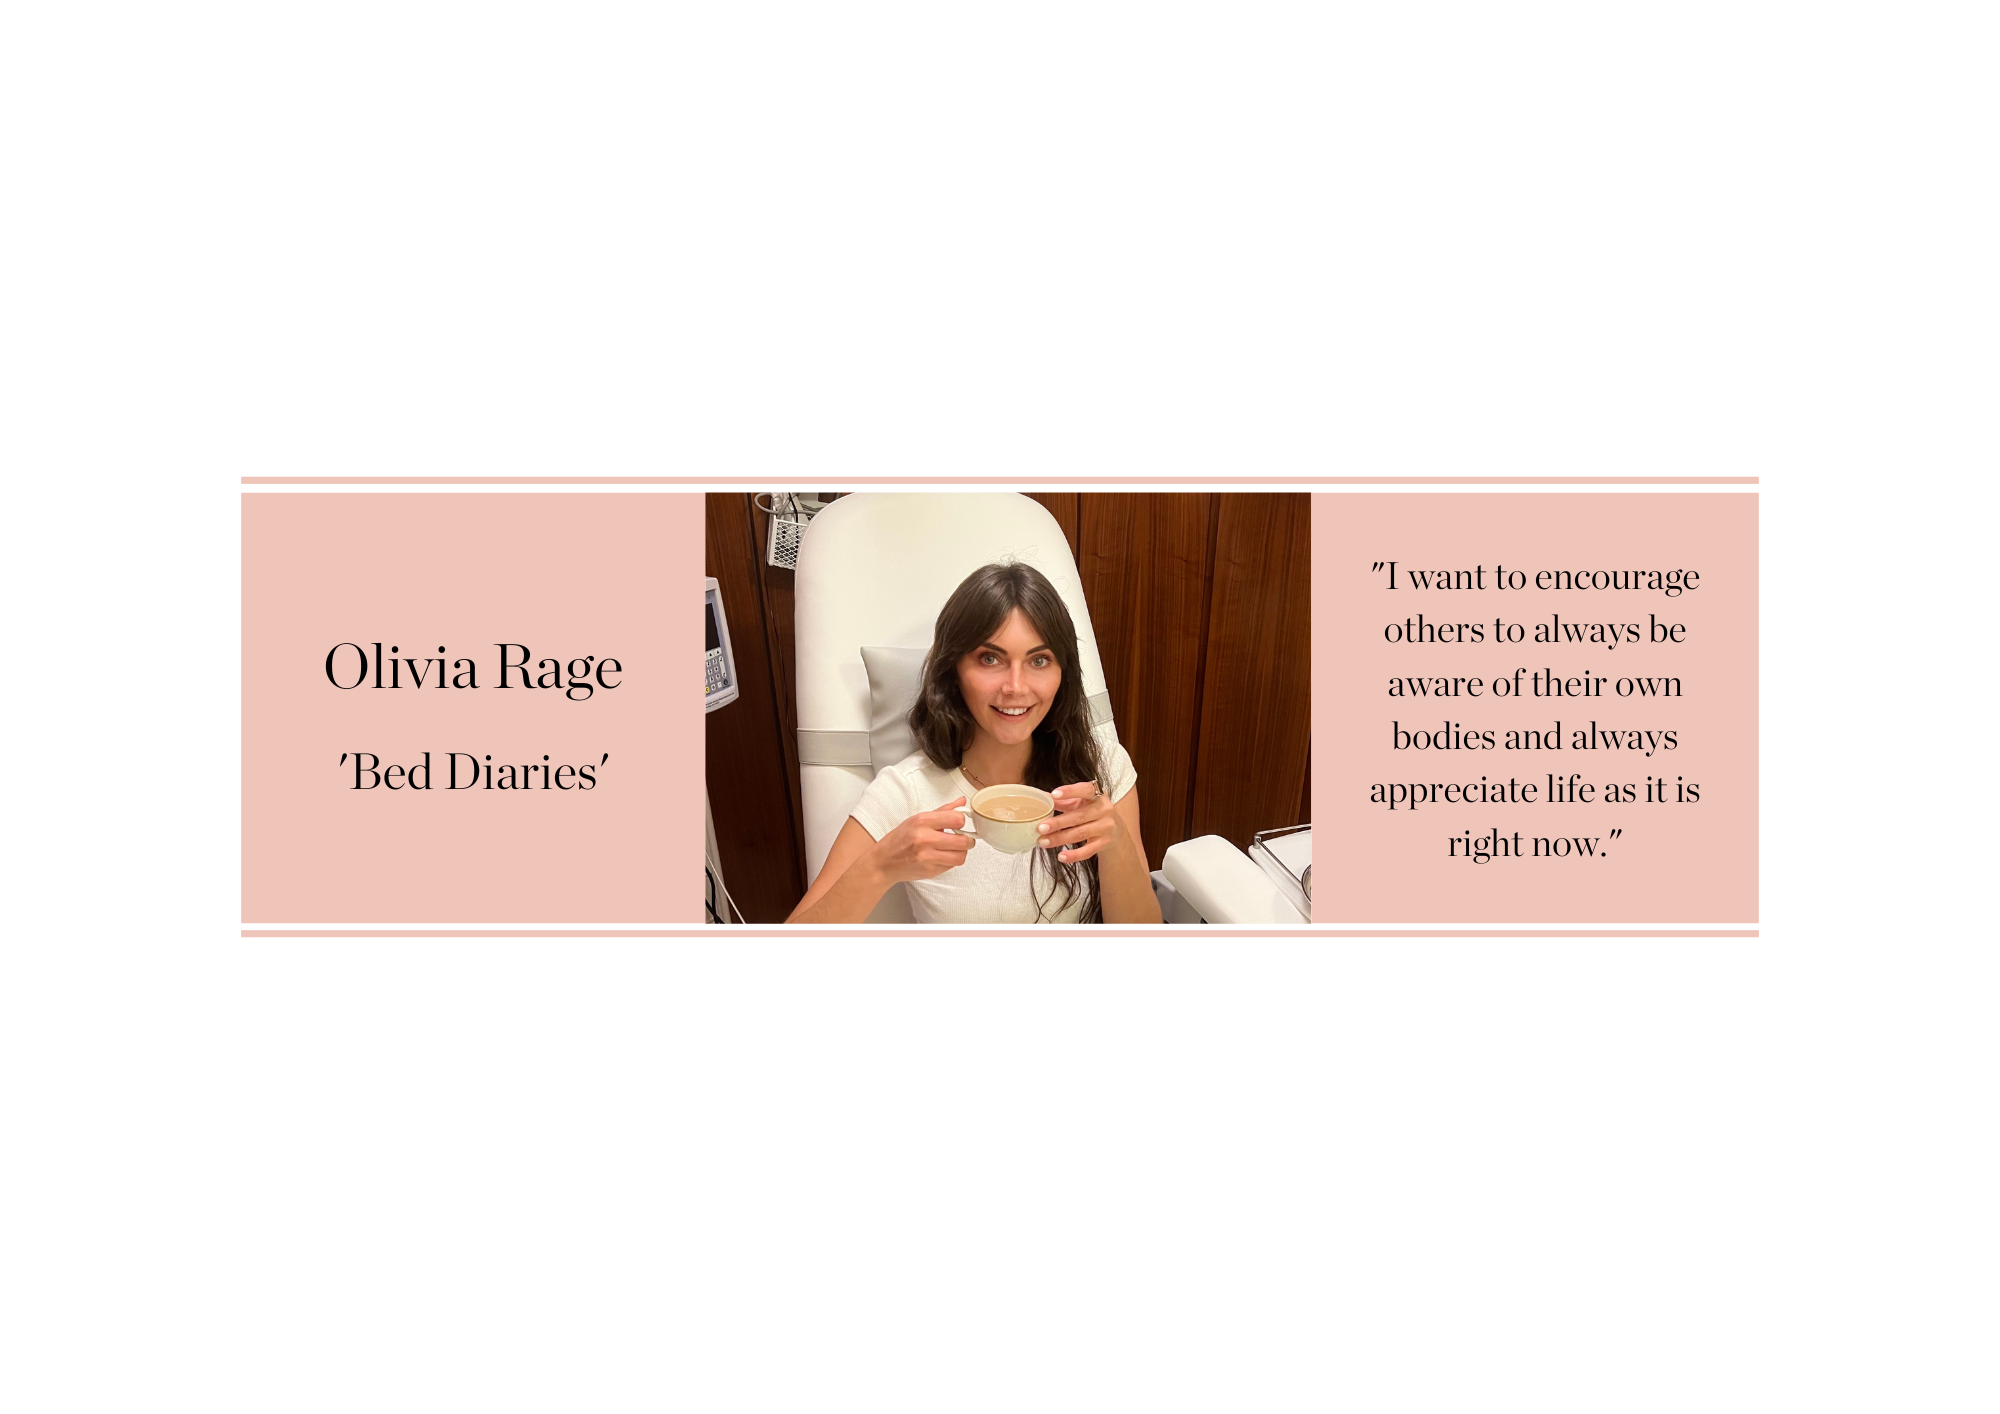 Olivia Rage picture from 'Bed Diaries' and quote